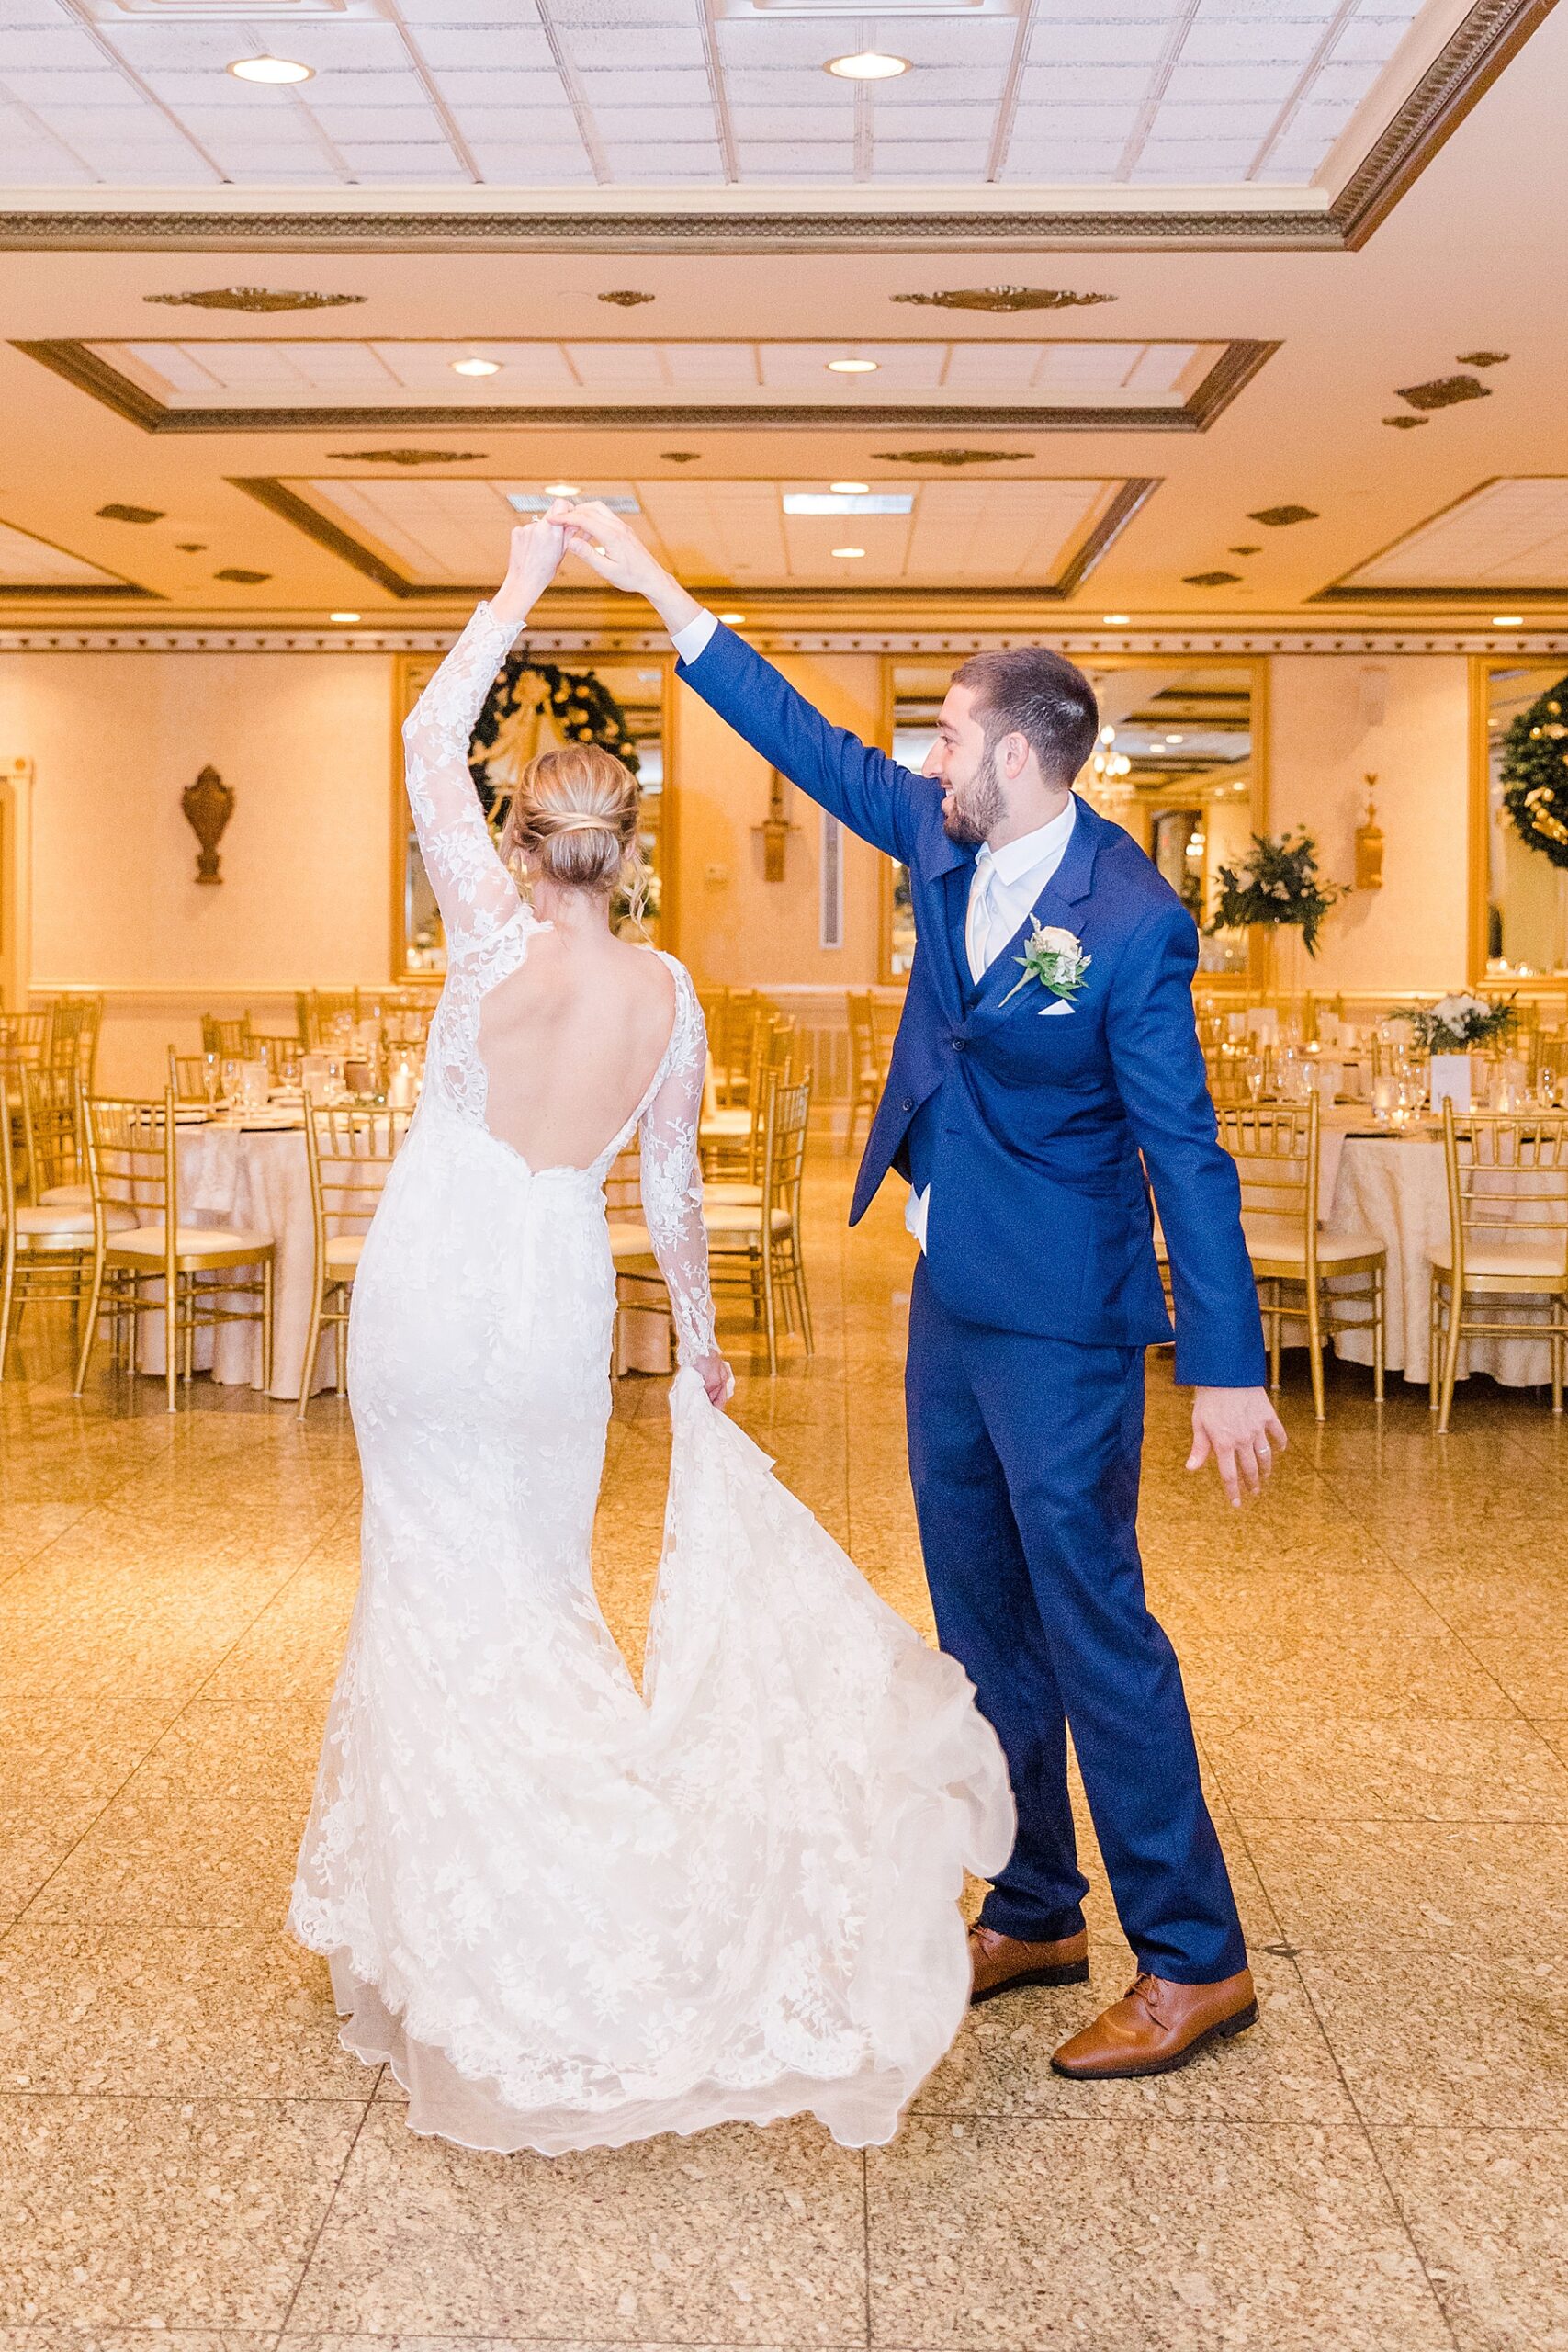 newlyweds share private moment at Glen Mills, PA wedding venue